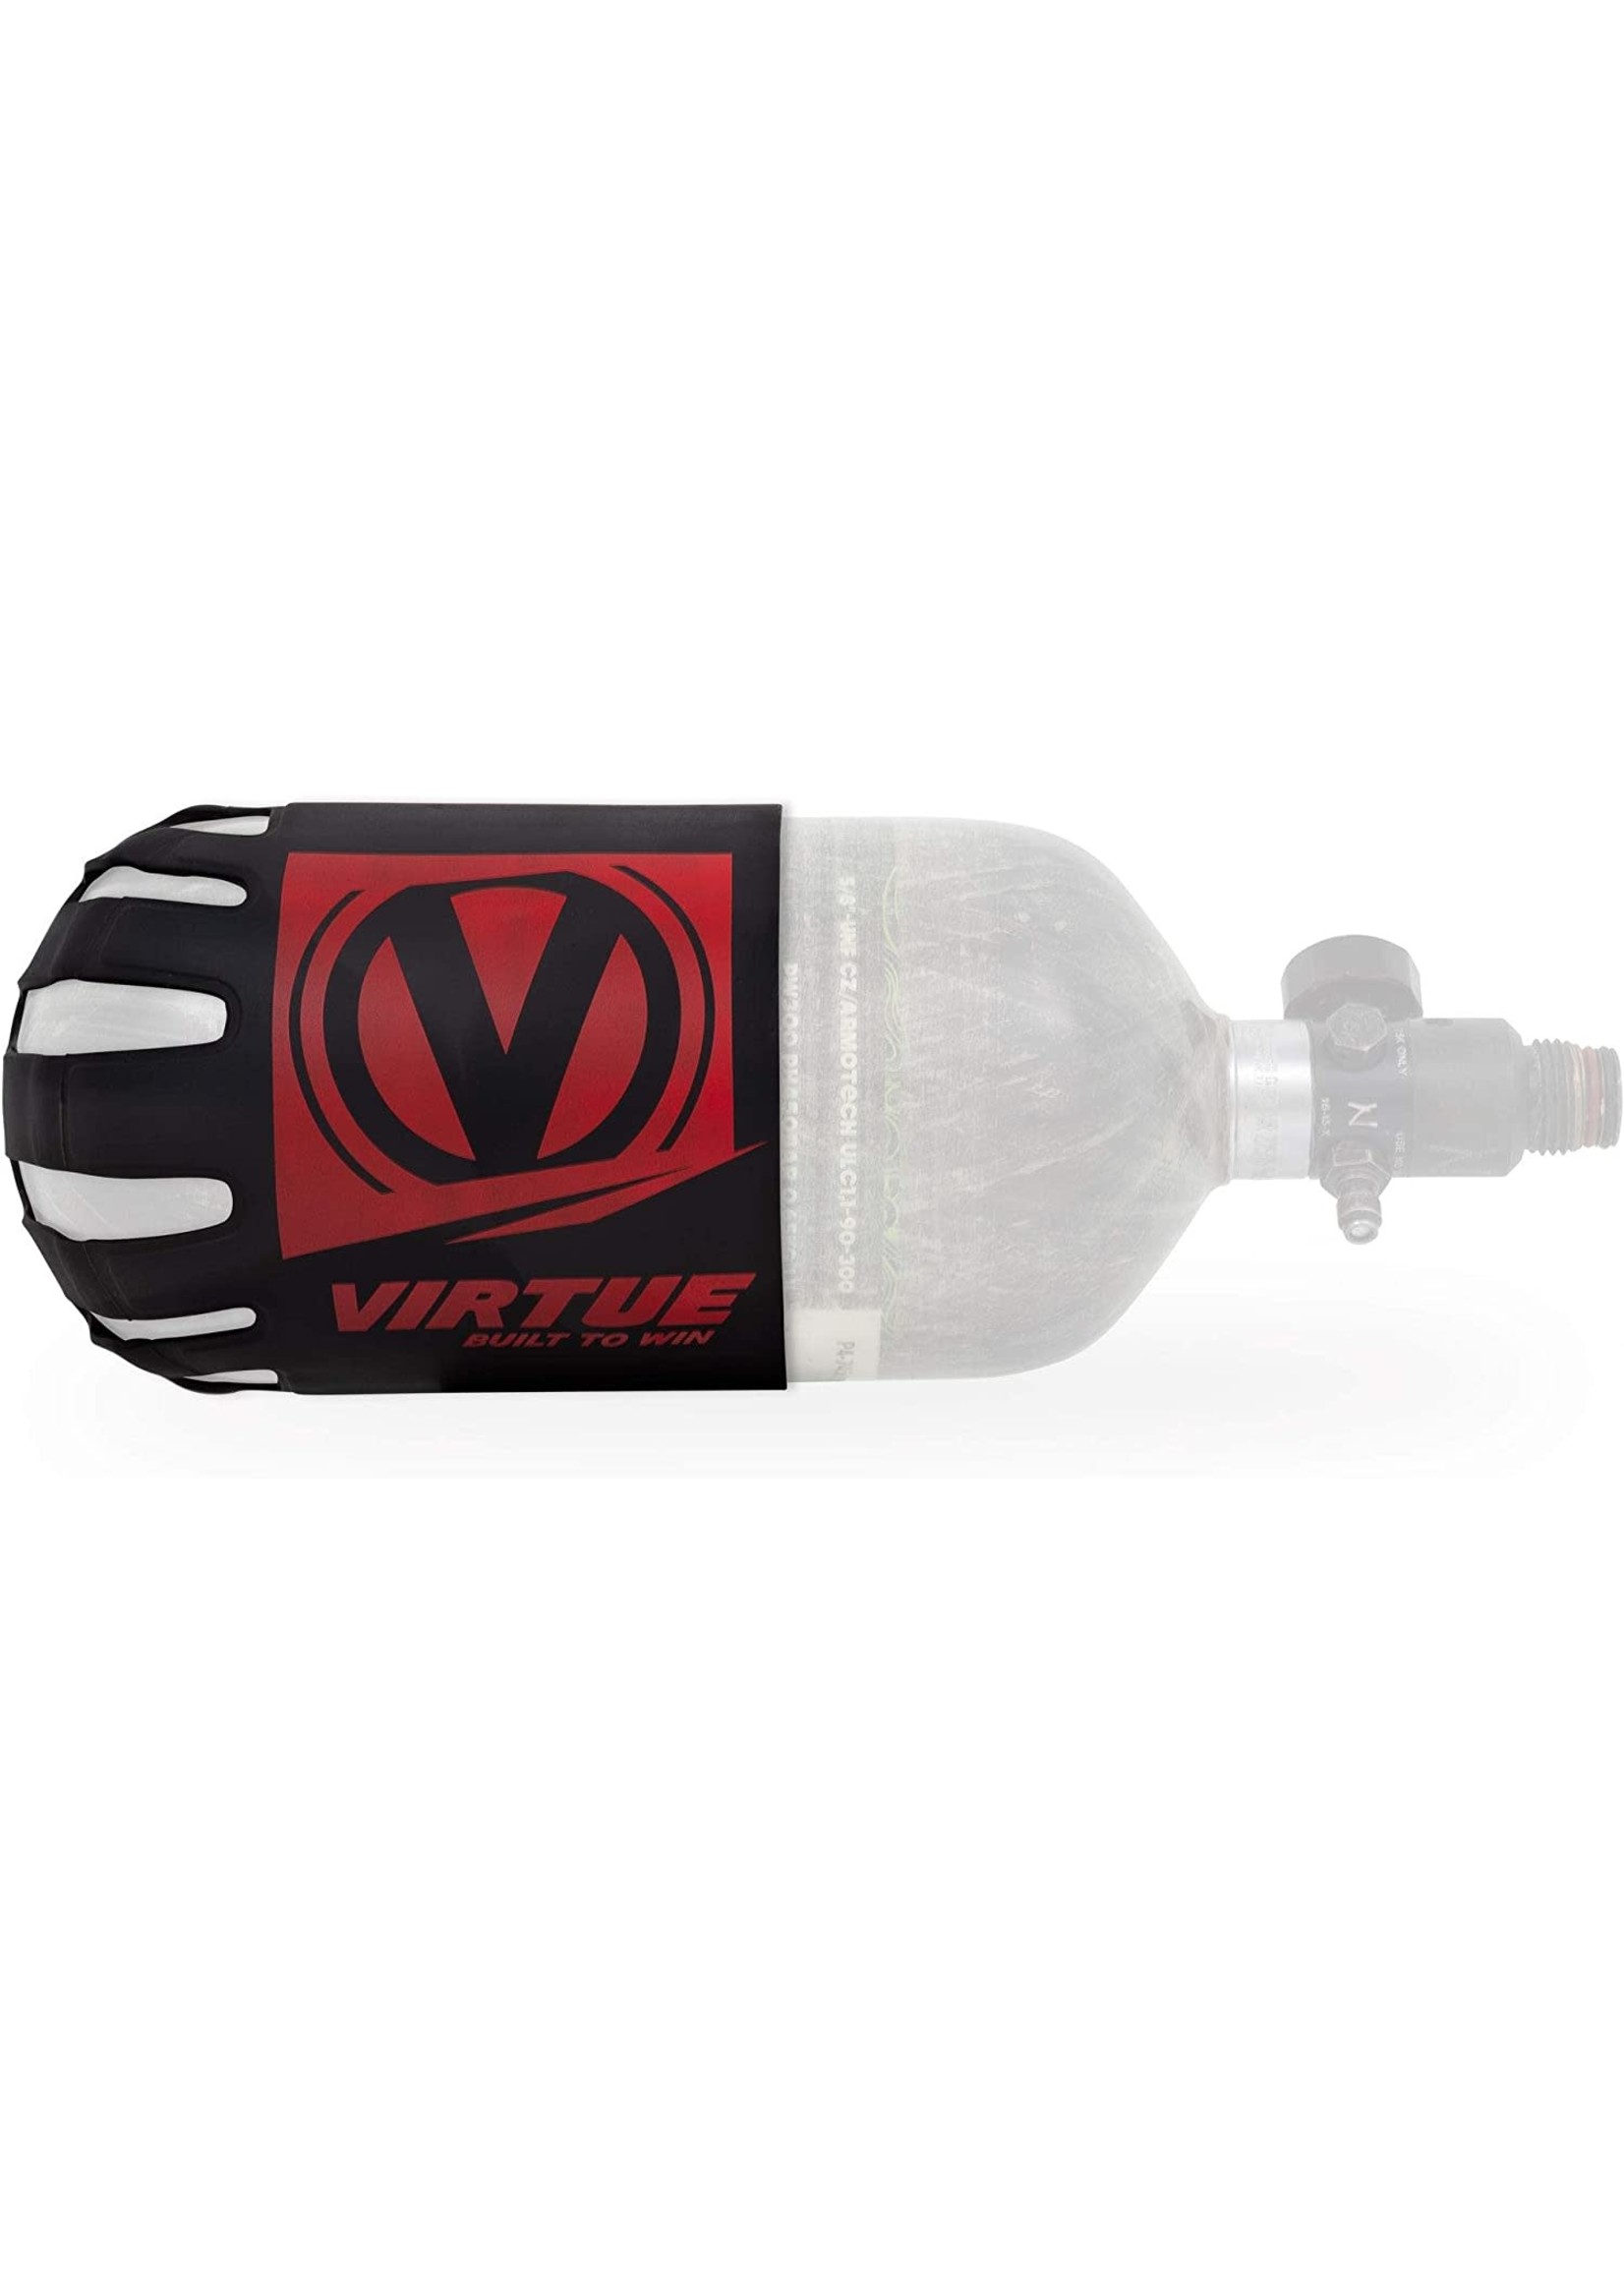 VIRTUE PAINTBALL VIRTUE SILICONE TANK COVER